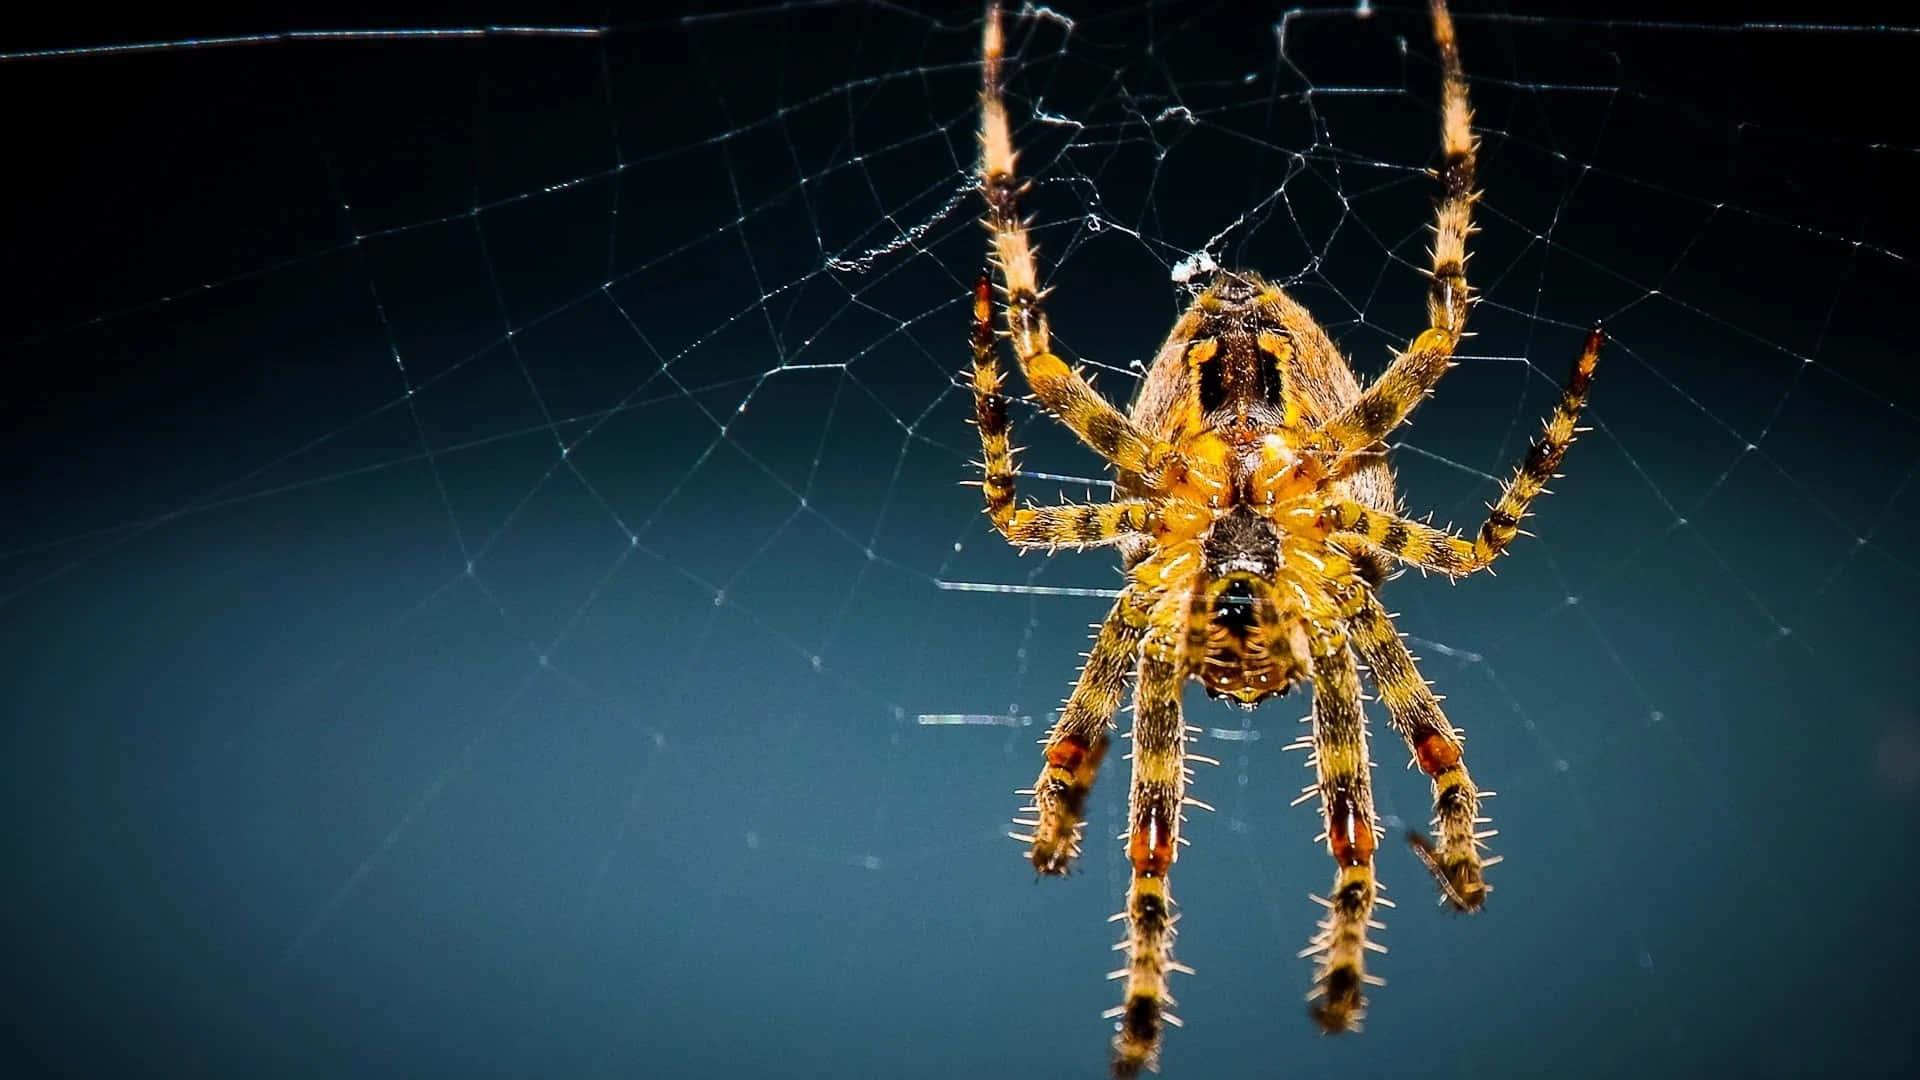 Enchanting Spider On A Web